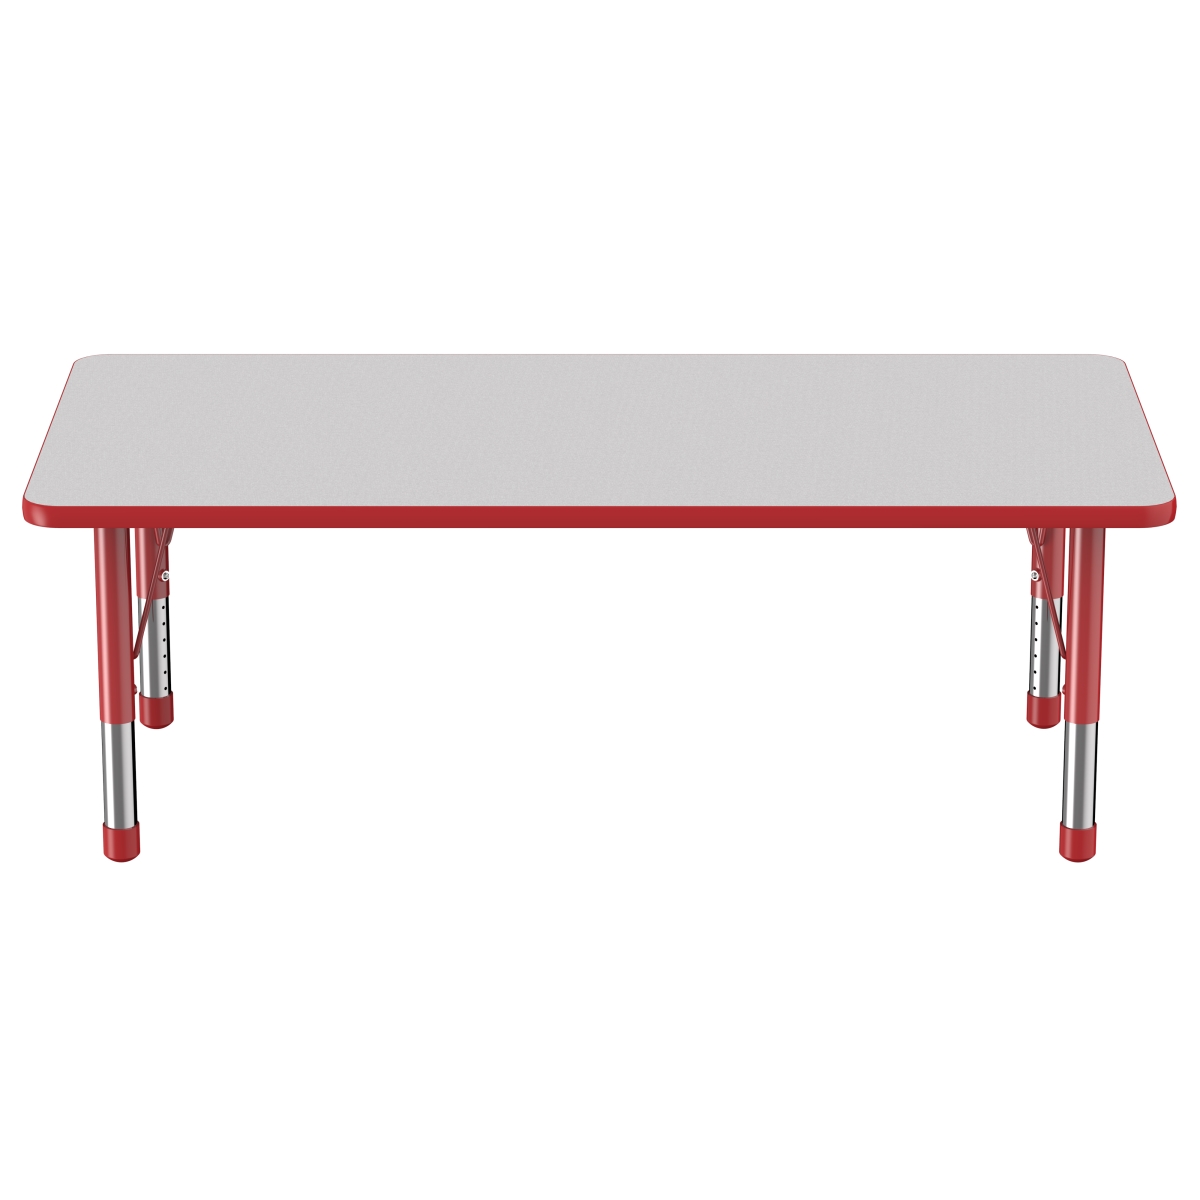 10025-gyrd 30 X 60 In. Rectangle T-mold Adjustable Activity Table With Chunky Leg - Grey & Red